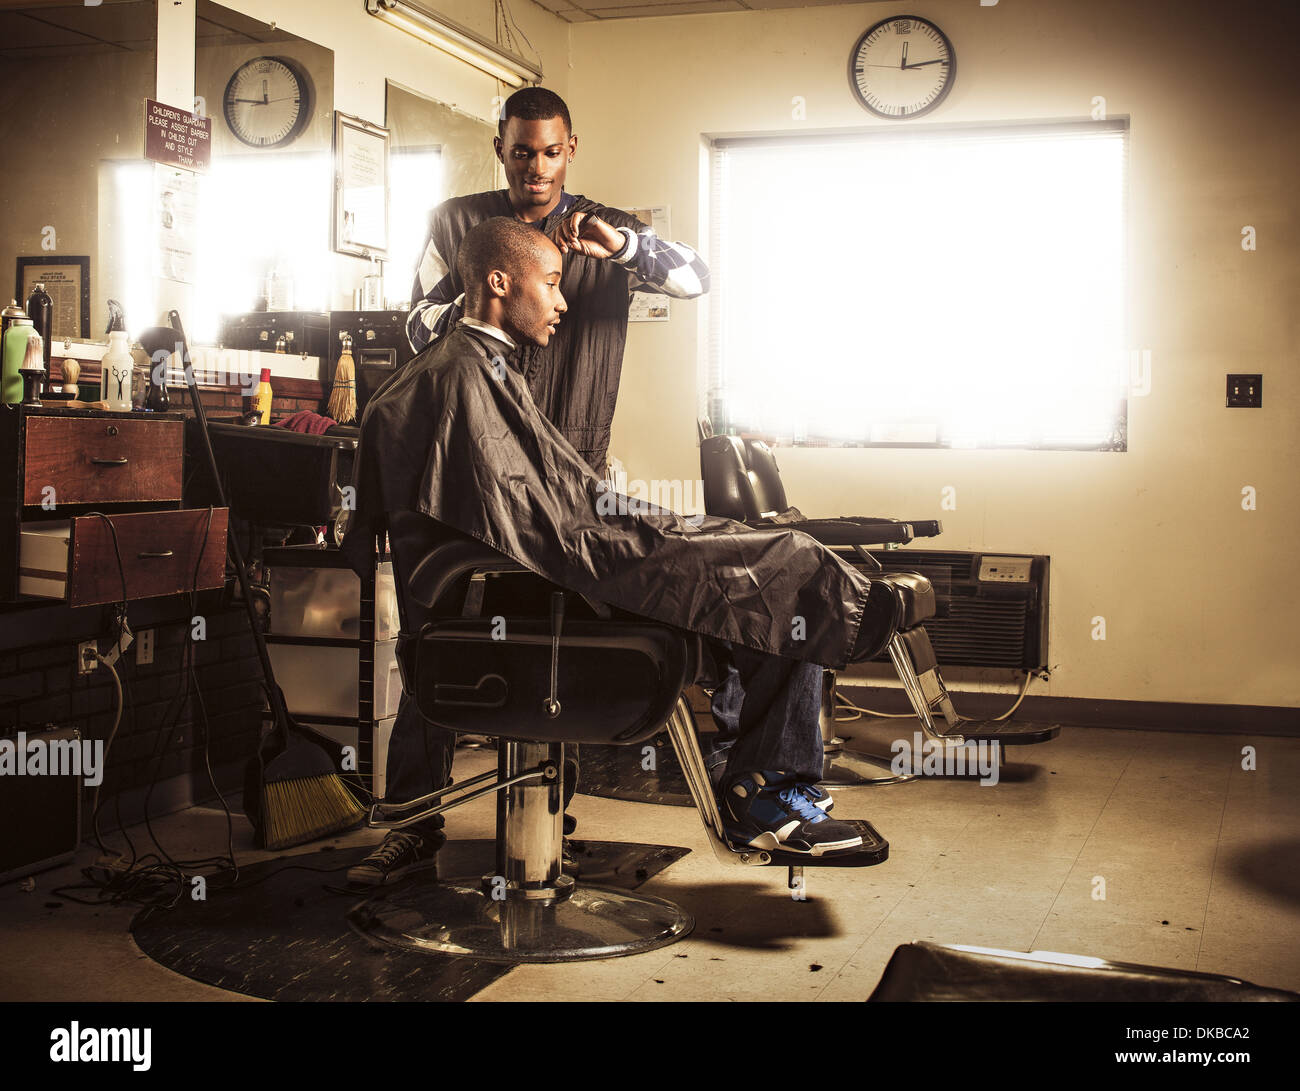 Barber in traditional barber shop shaving man's head Stock Photo